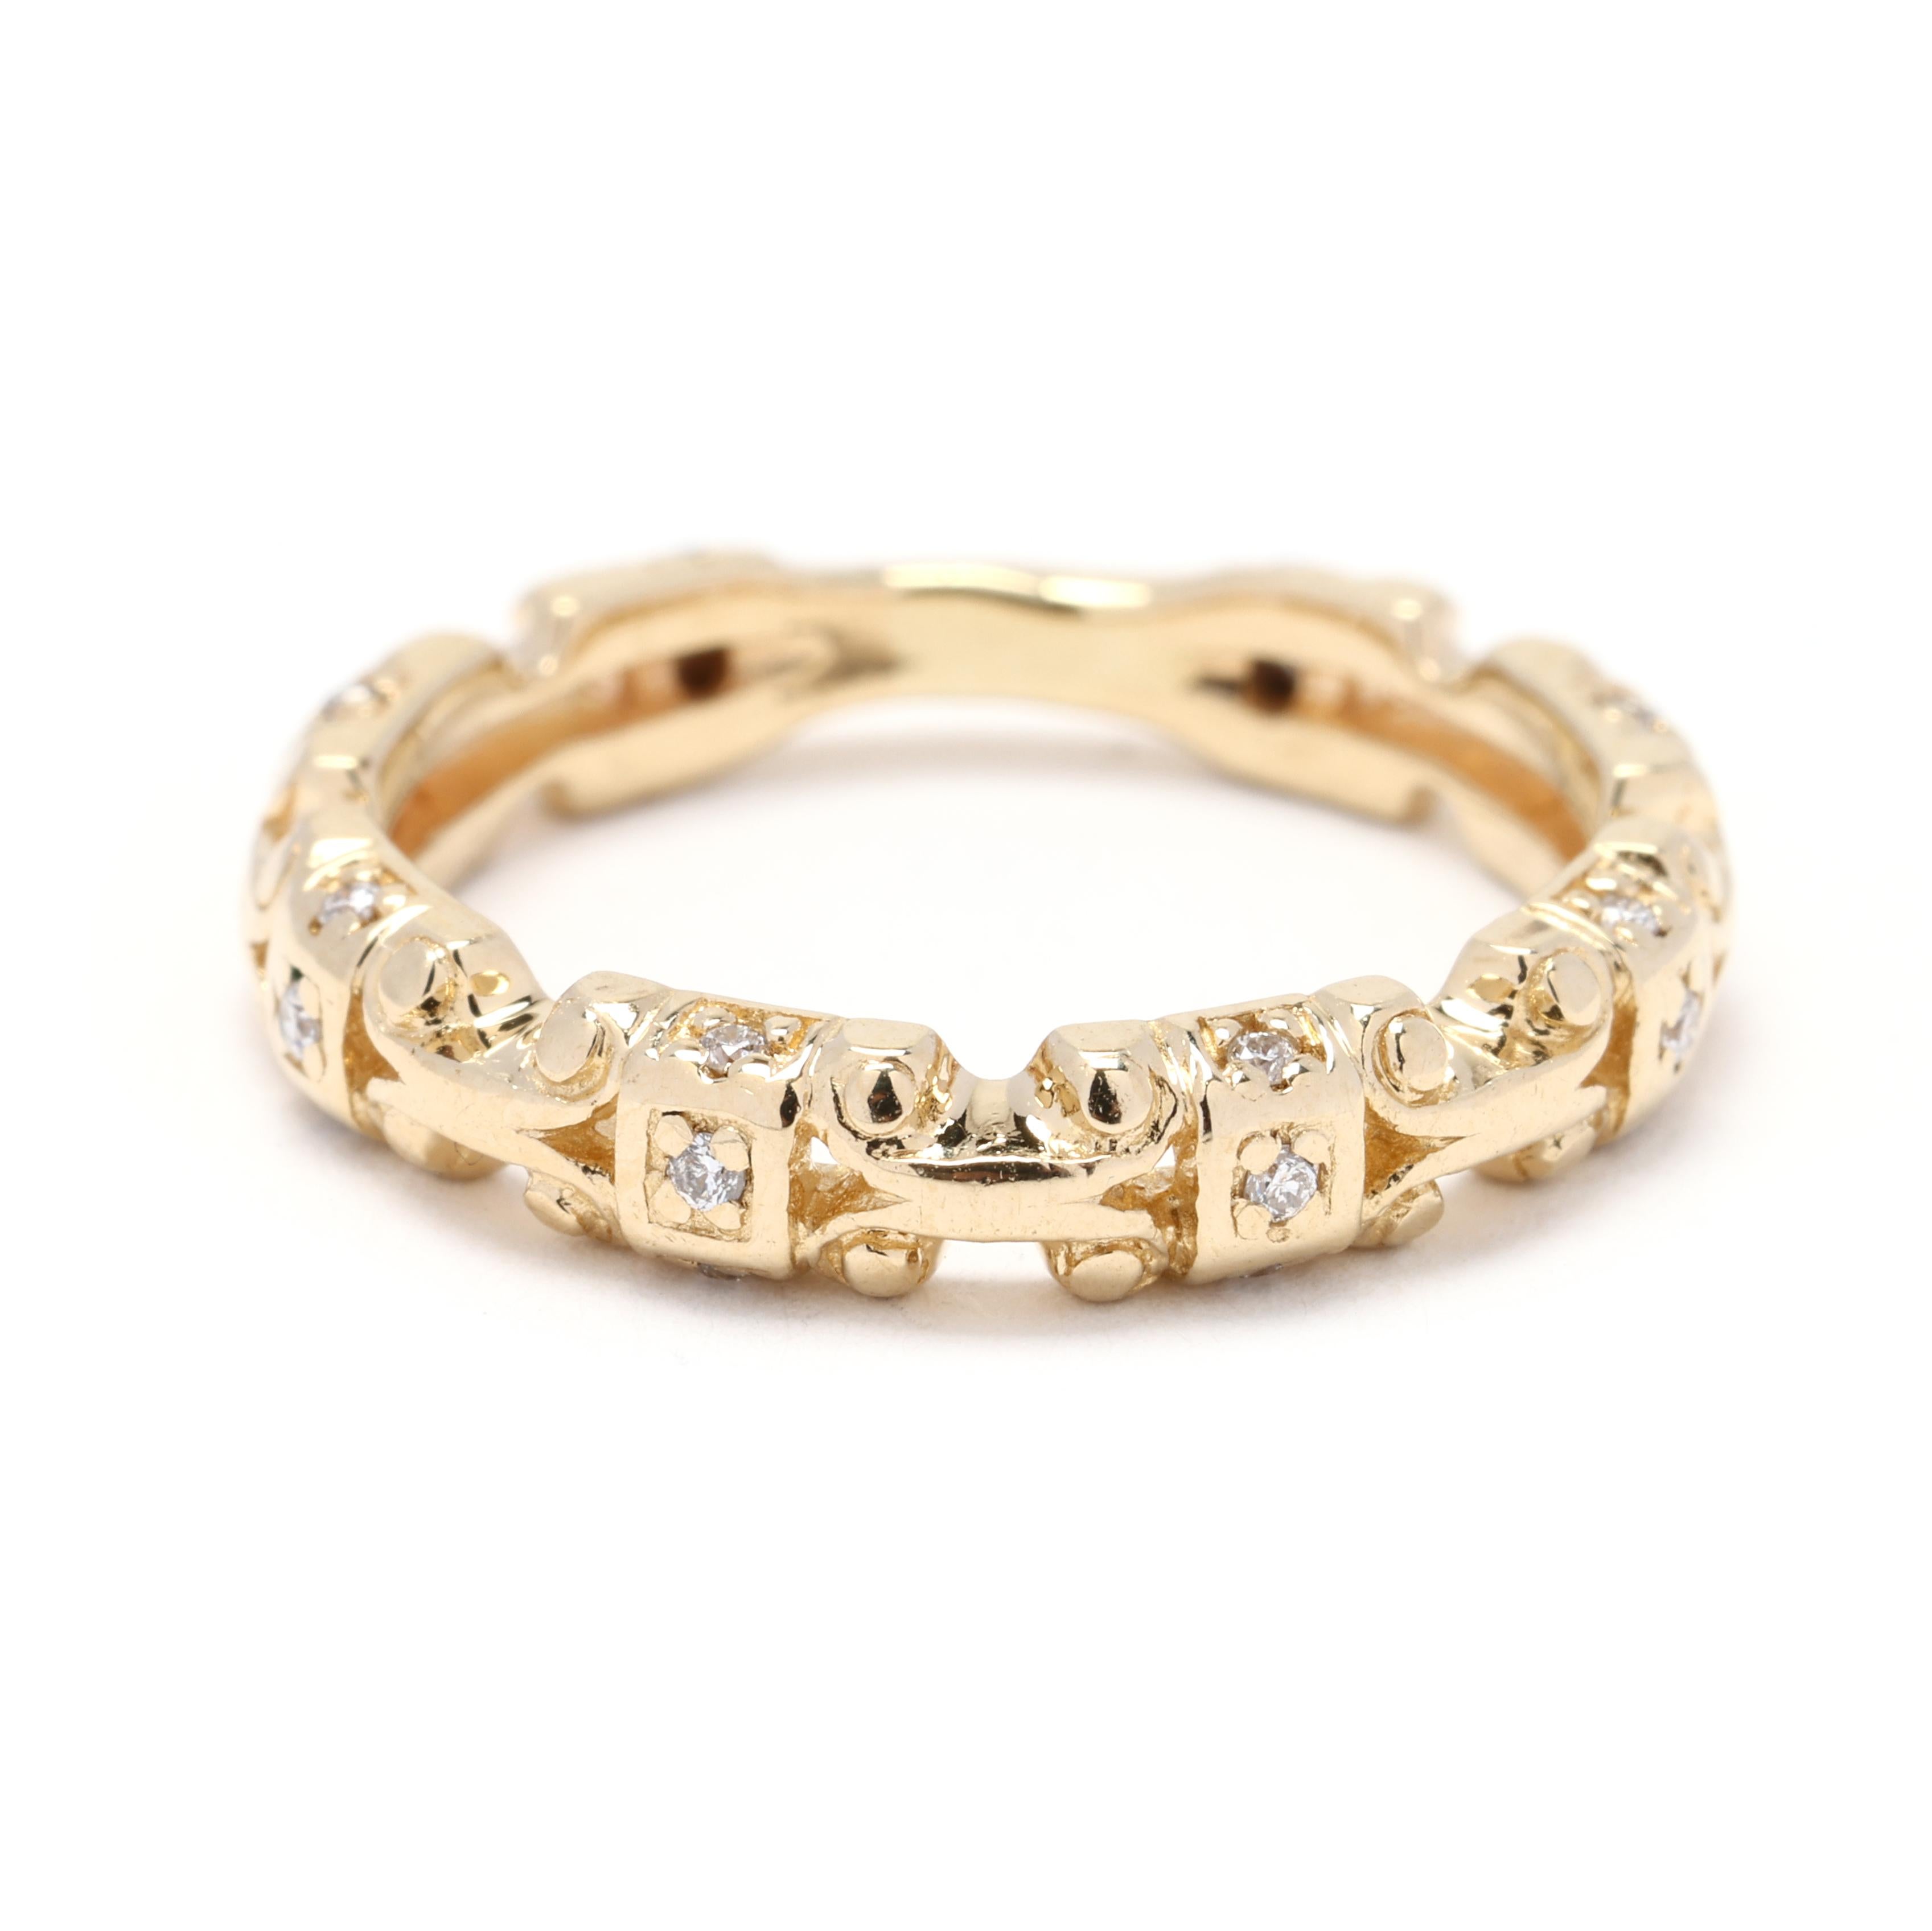 0.12ctw Diamond Patterned Band, 14k Yellow Gold, Ring Size 4.5 For Sale